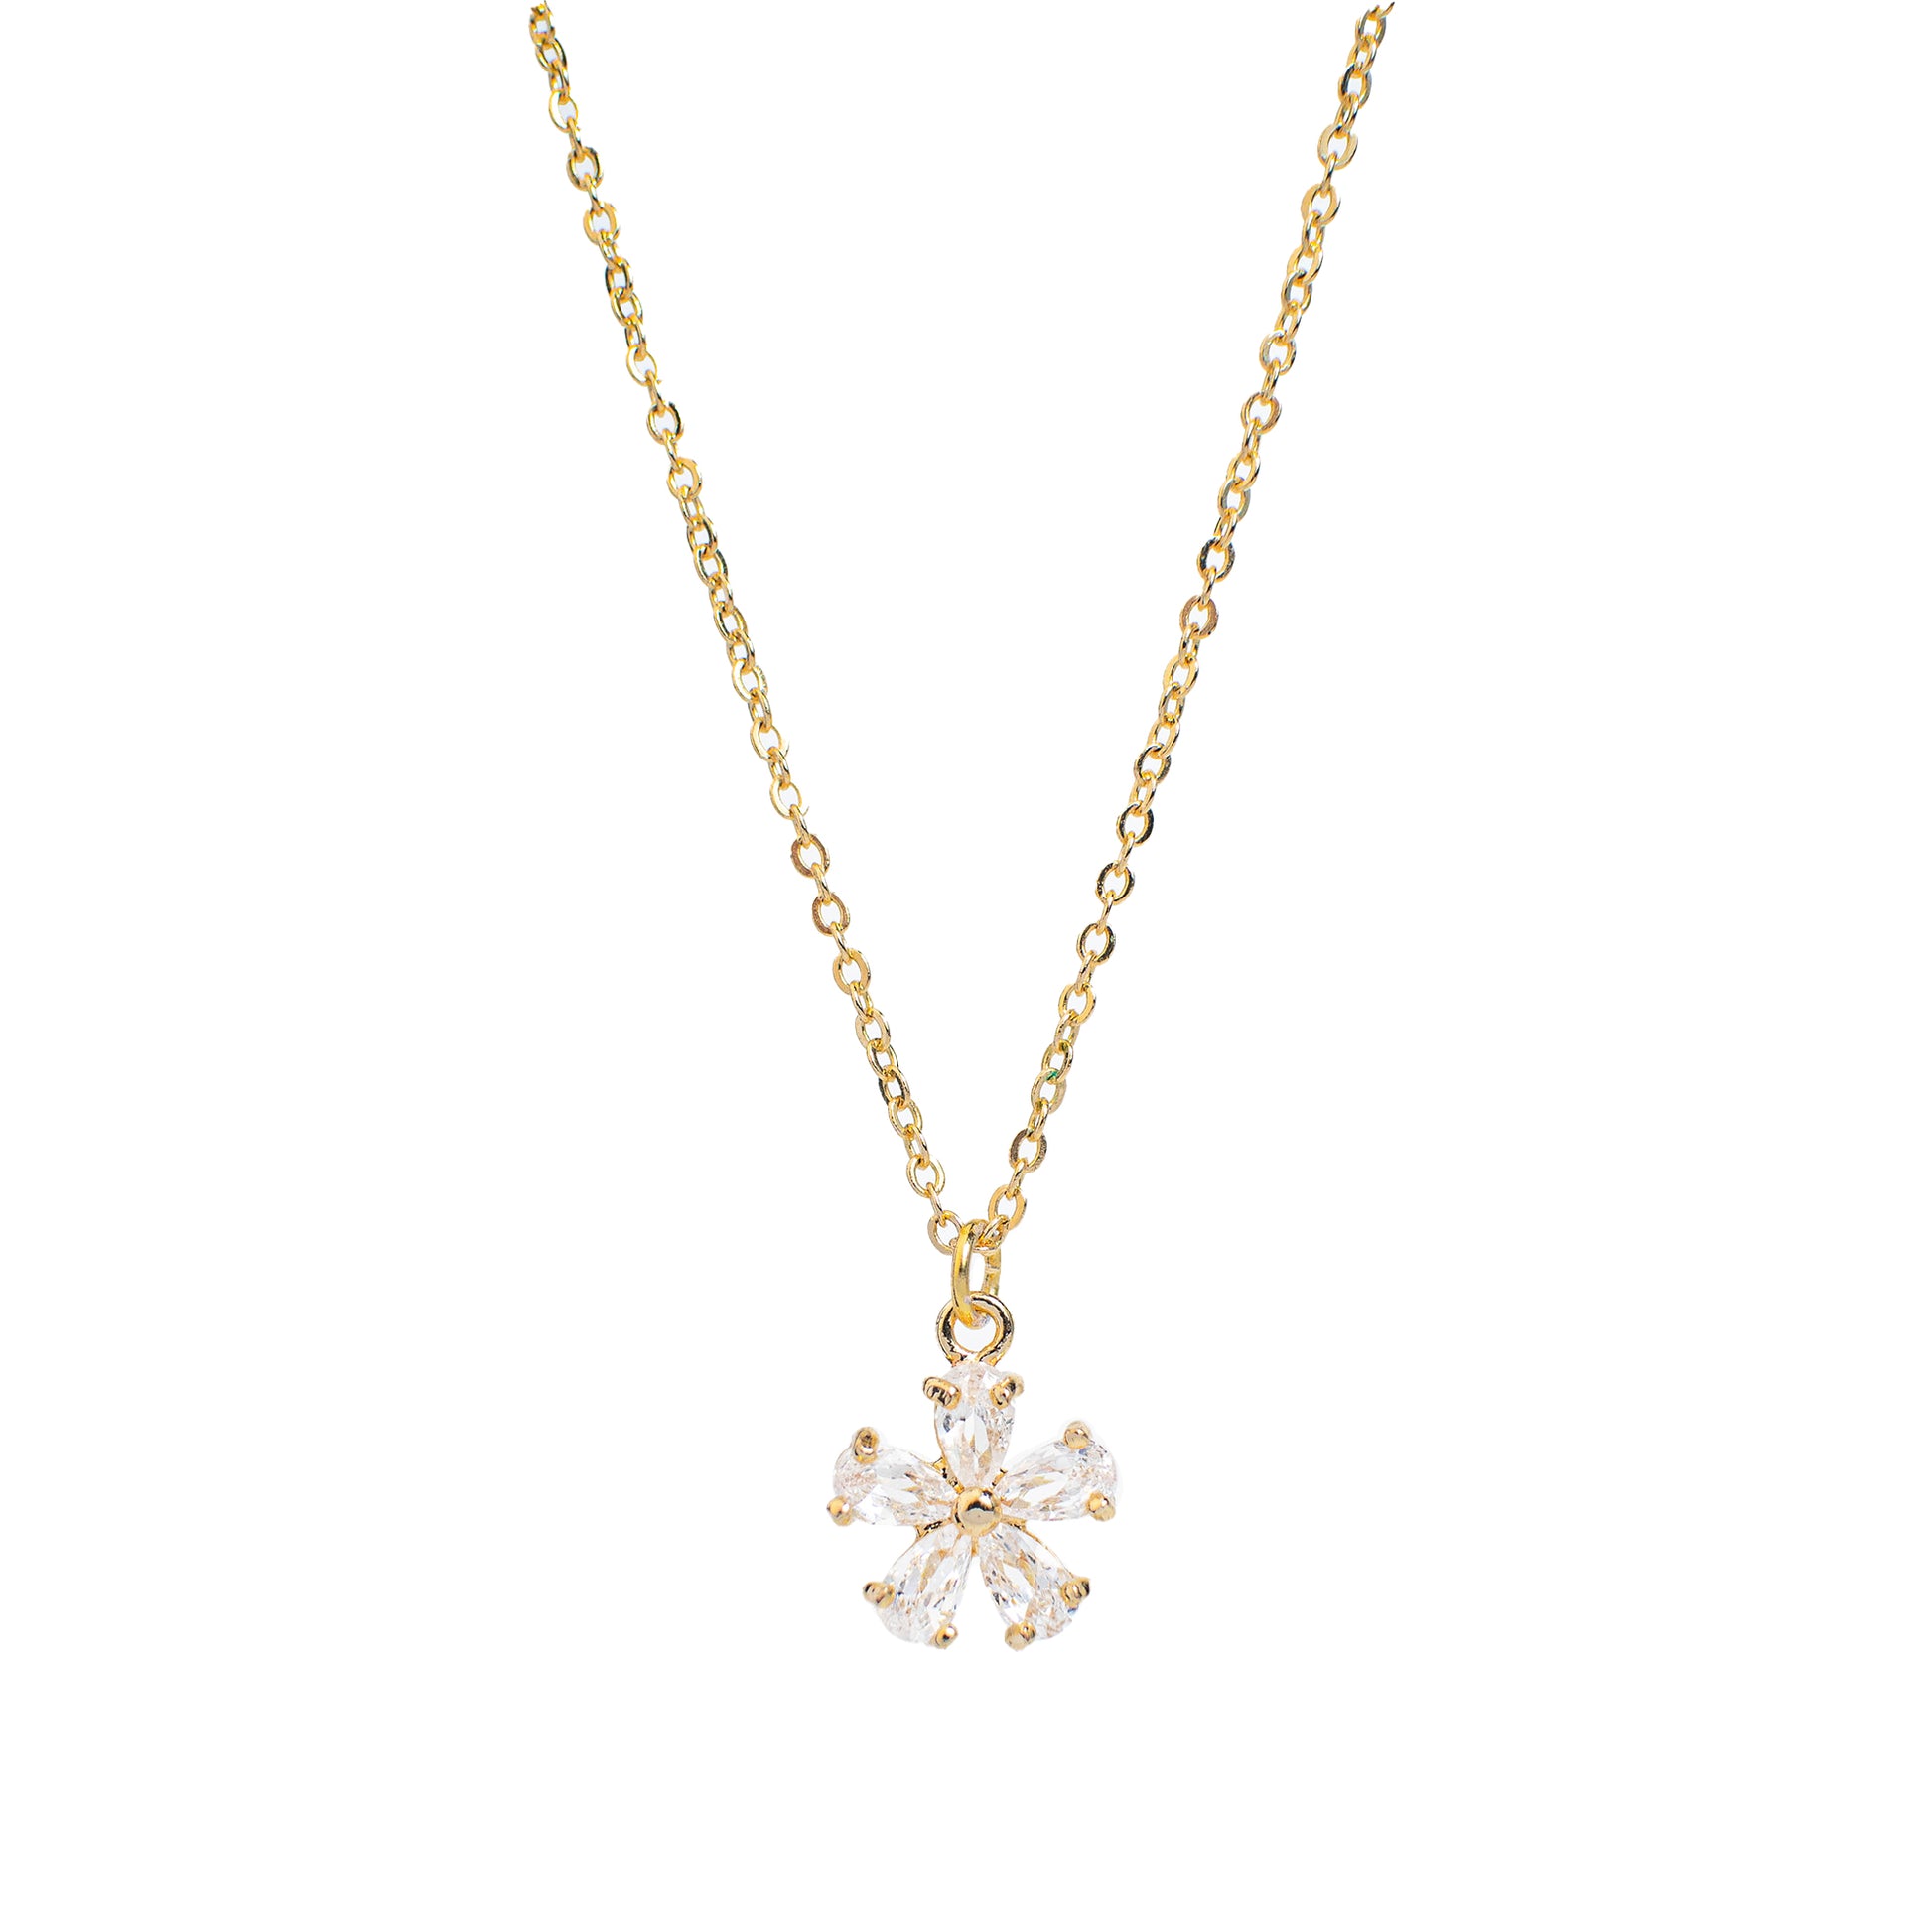 This photo features a thin chain necklace made of 14K gold-plated sterling silver, paired with a zircon Flower charm.